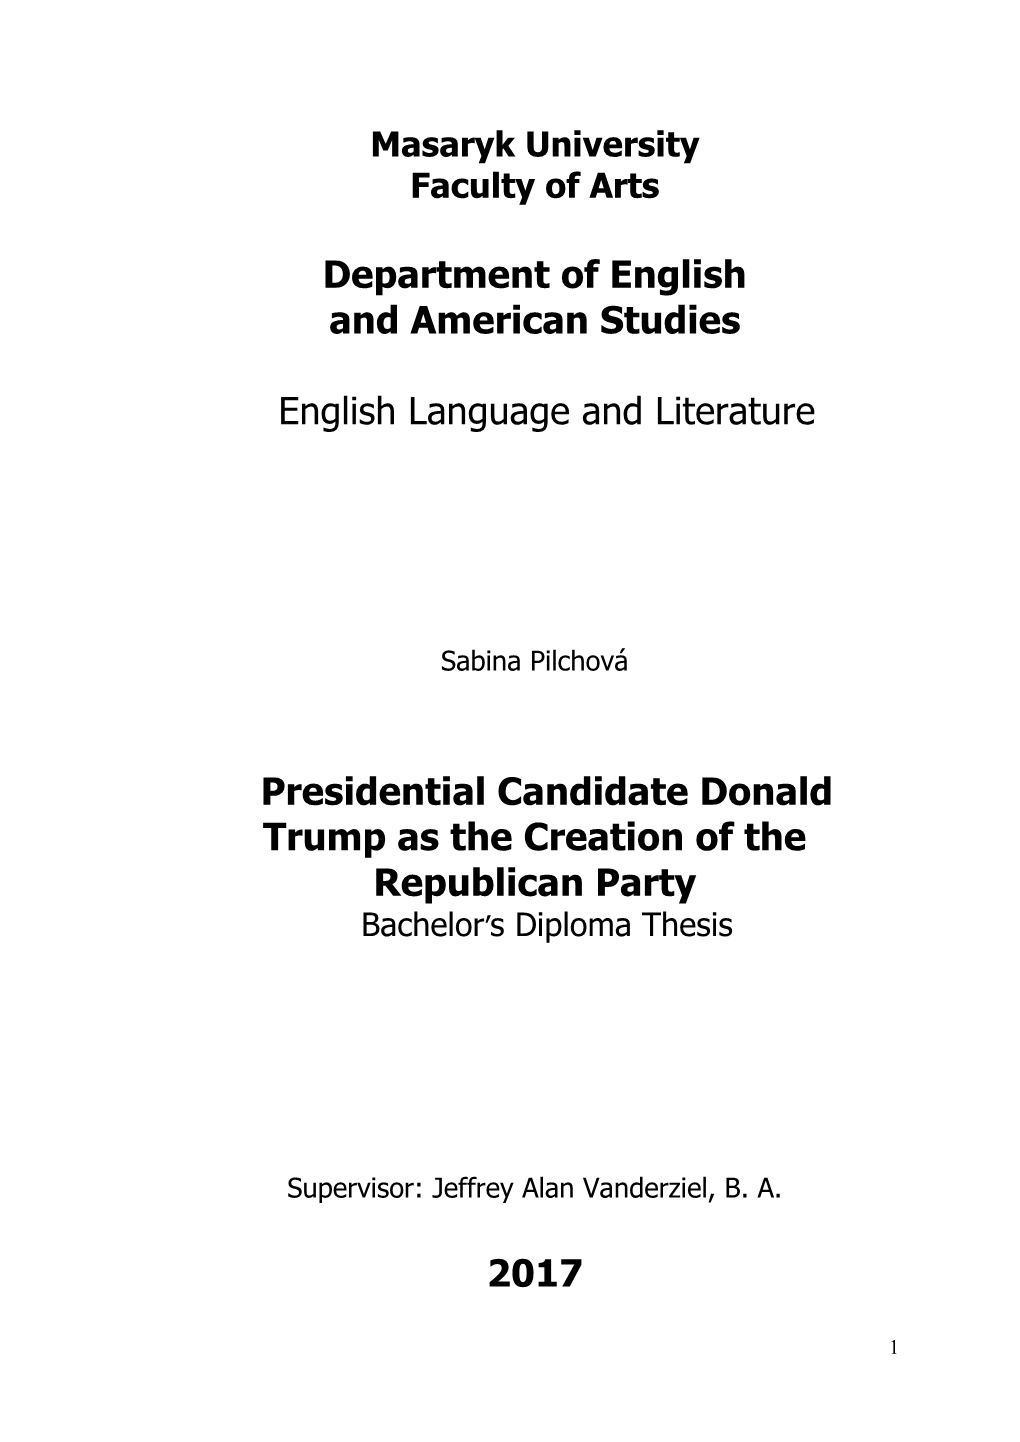 Presidential Candidate Donald Trump As the Creation of the Republican Party Bachelor’S Diploma Thesis